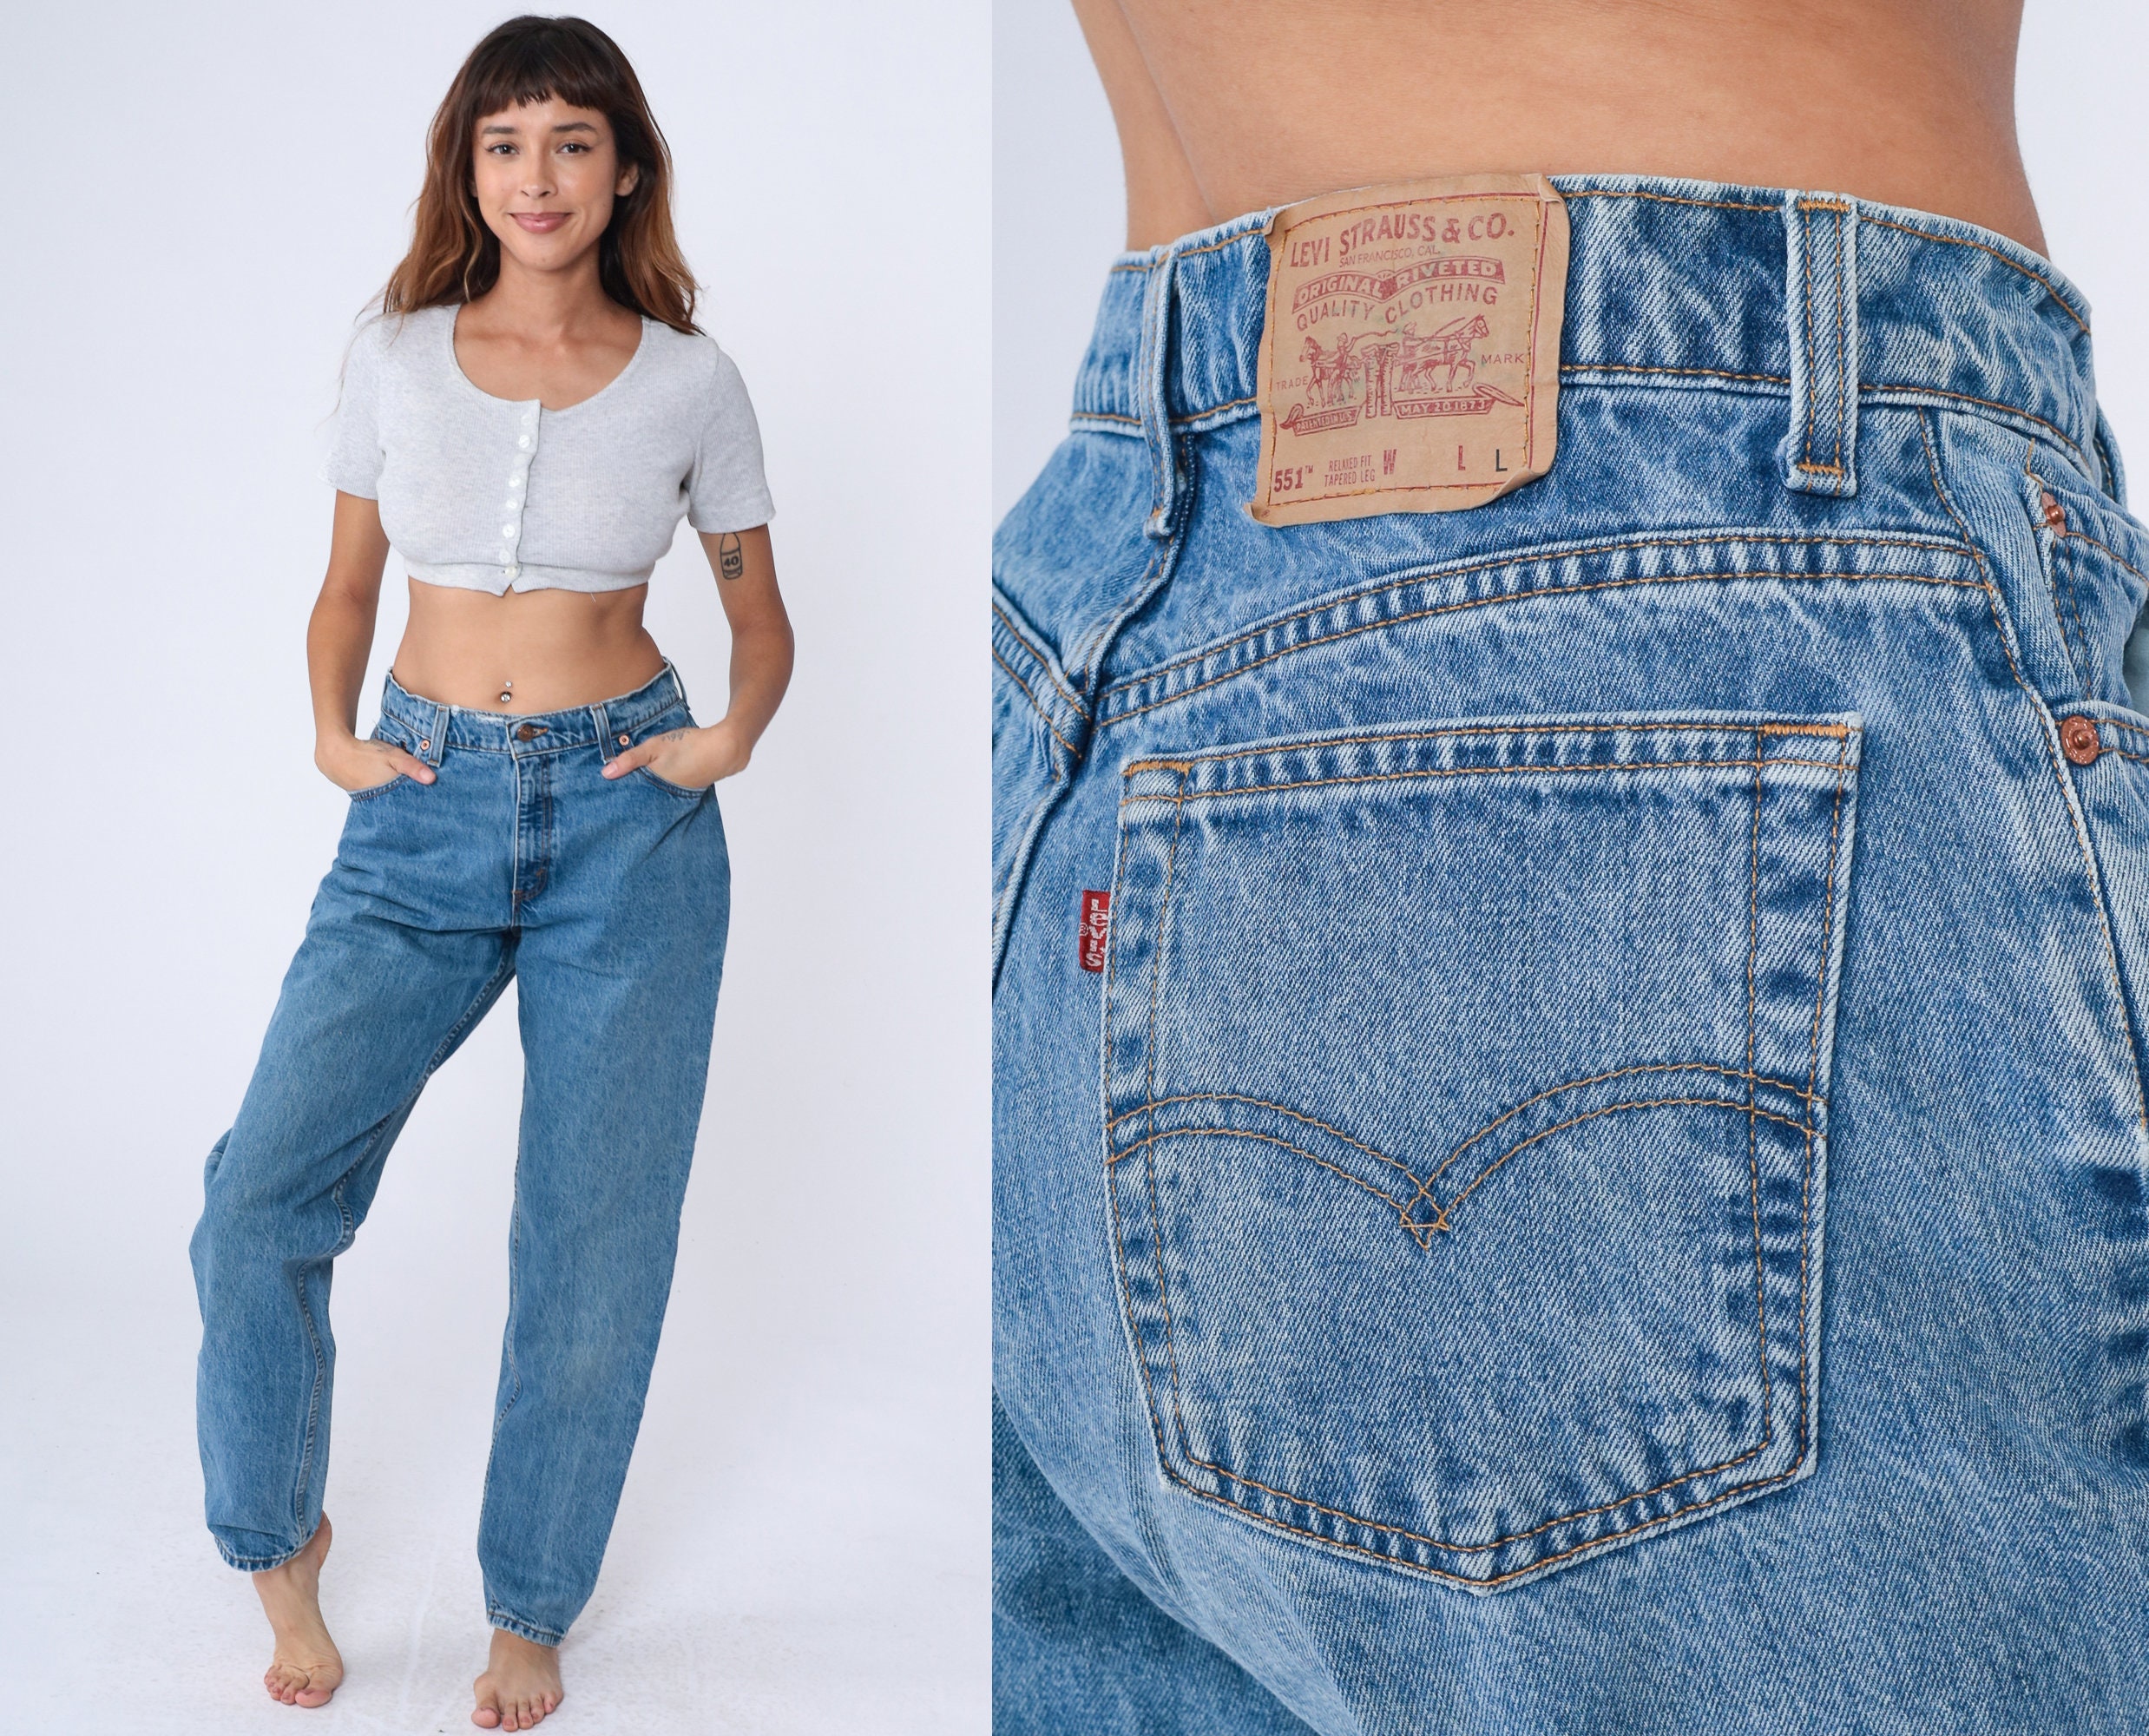 Levis 551 Jeans -- Mom Jeans Blue 90s Denim Pants Tapered Slim Jean Pants  Levis Strauss 1990s Red Tab Large 12 Long 31 x 31